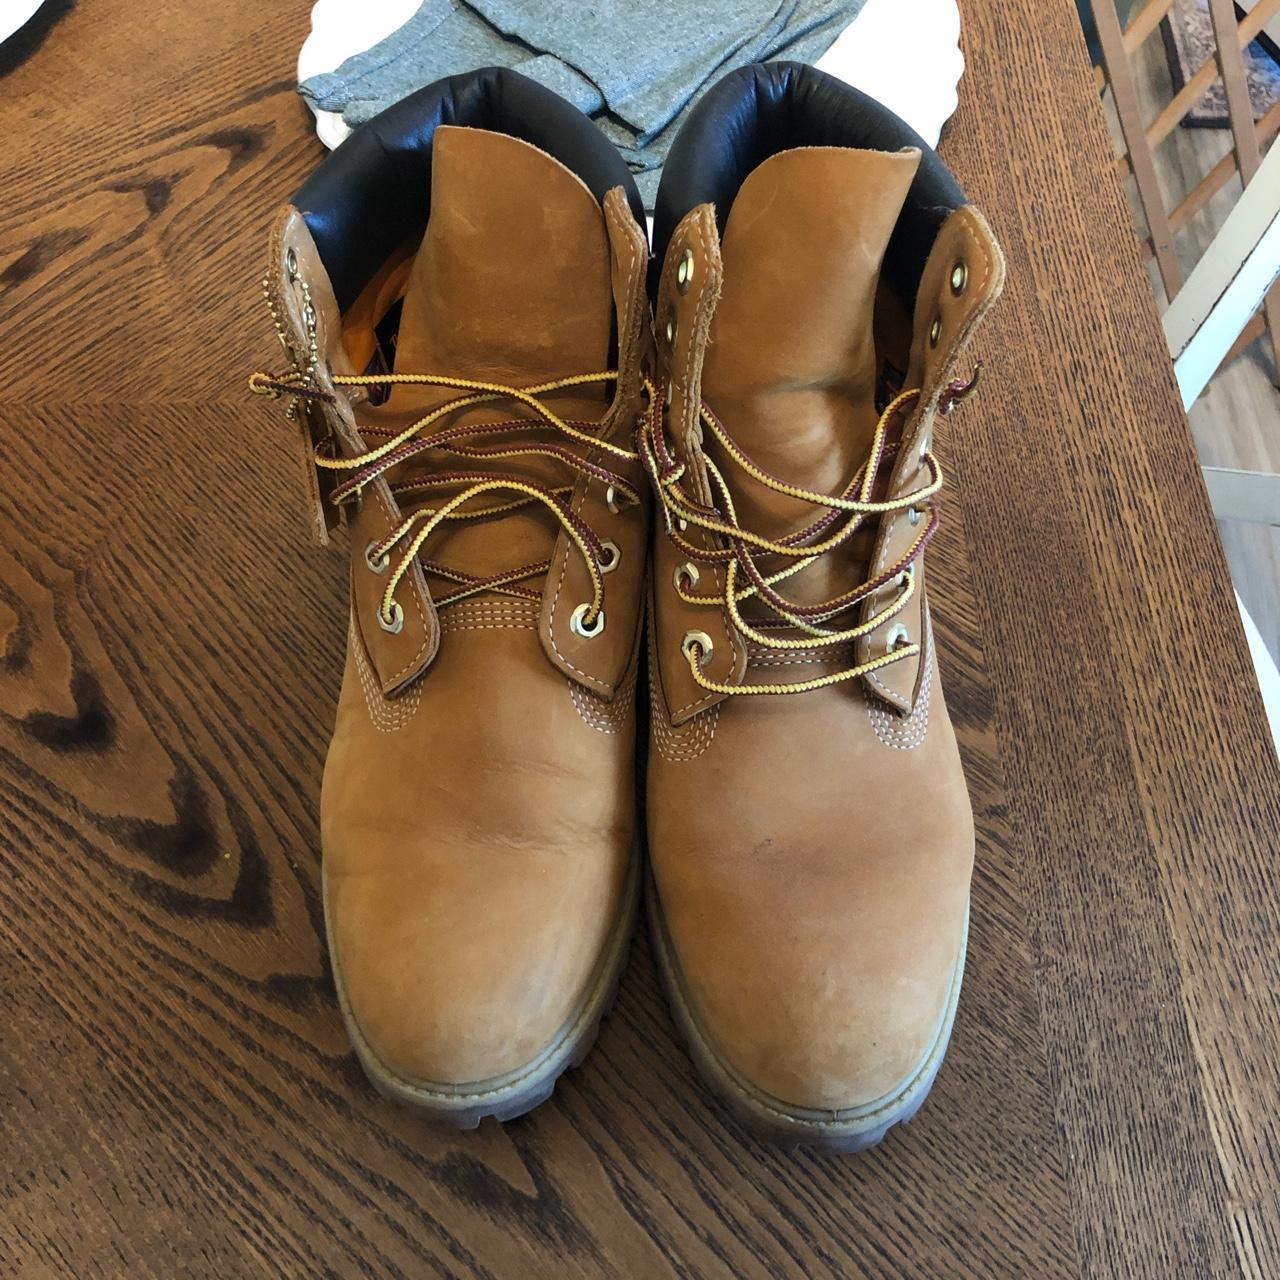 Timberland Men's Tan and Black Boots (2)